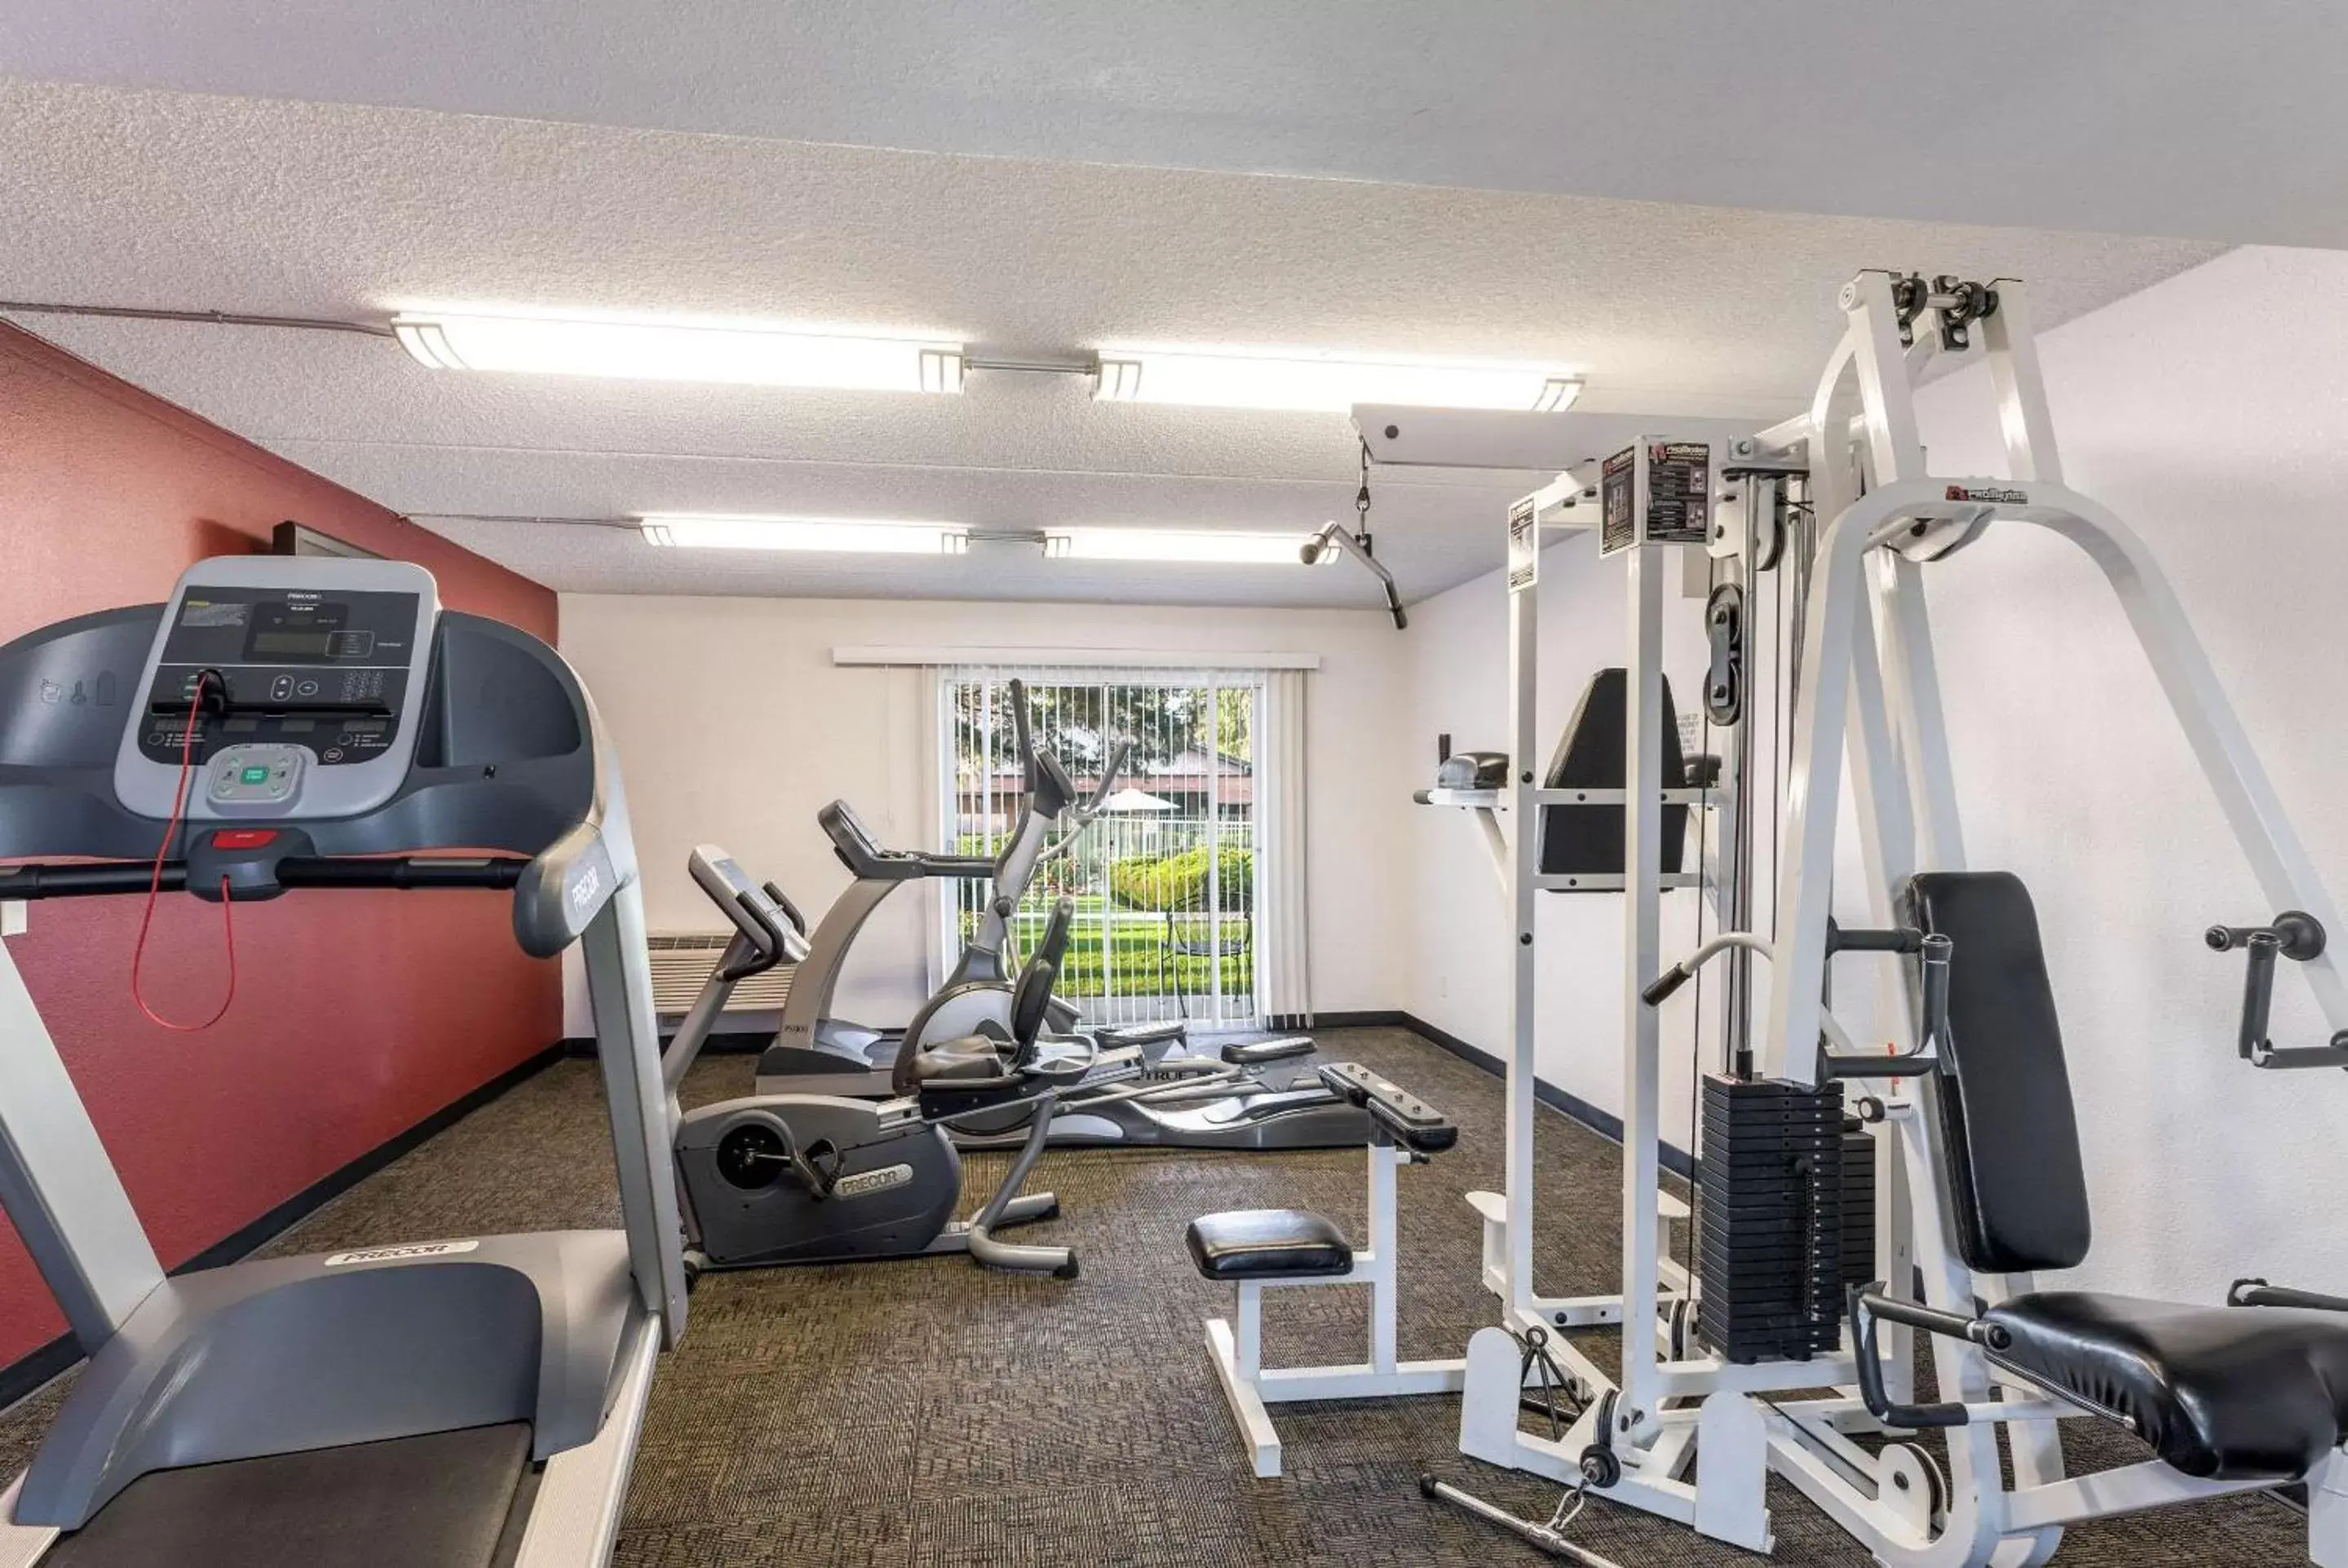 Fitness centre/facilities, Fitness Center/Facilities in Quality Inn Payson